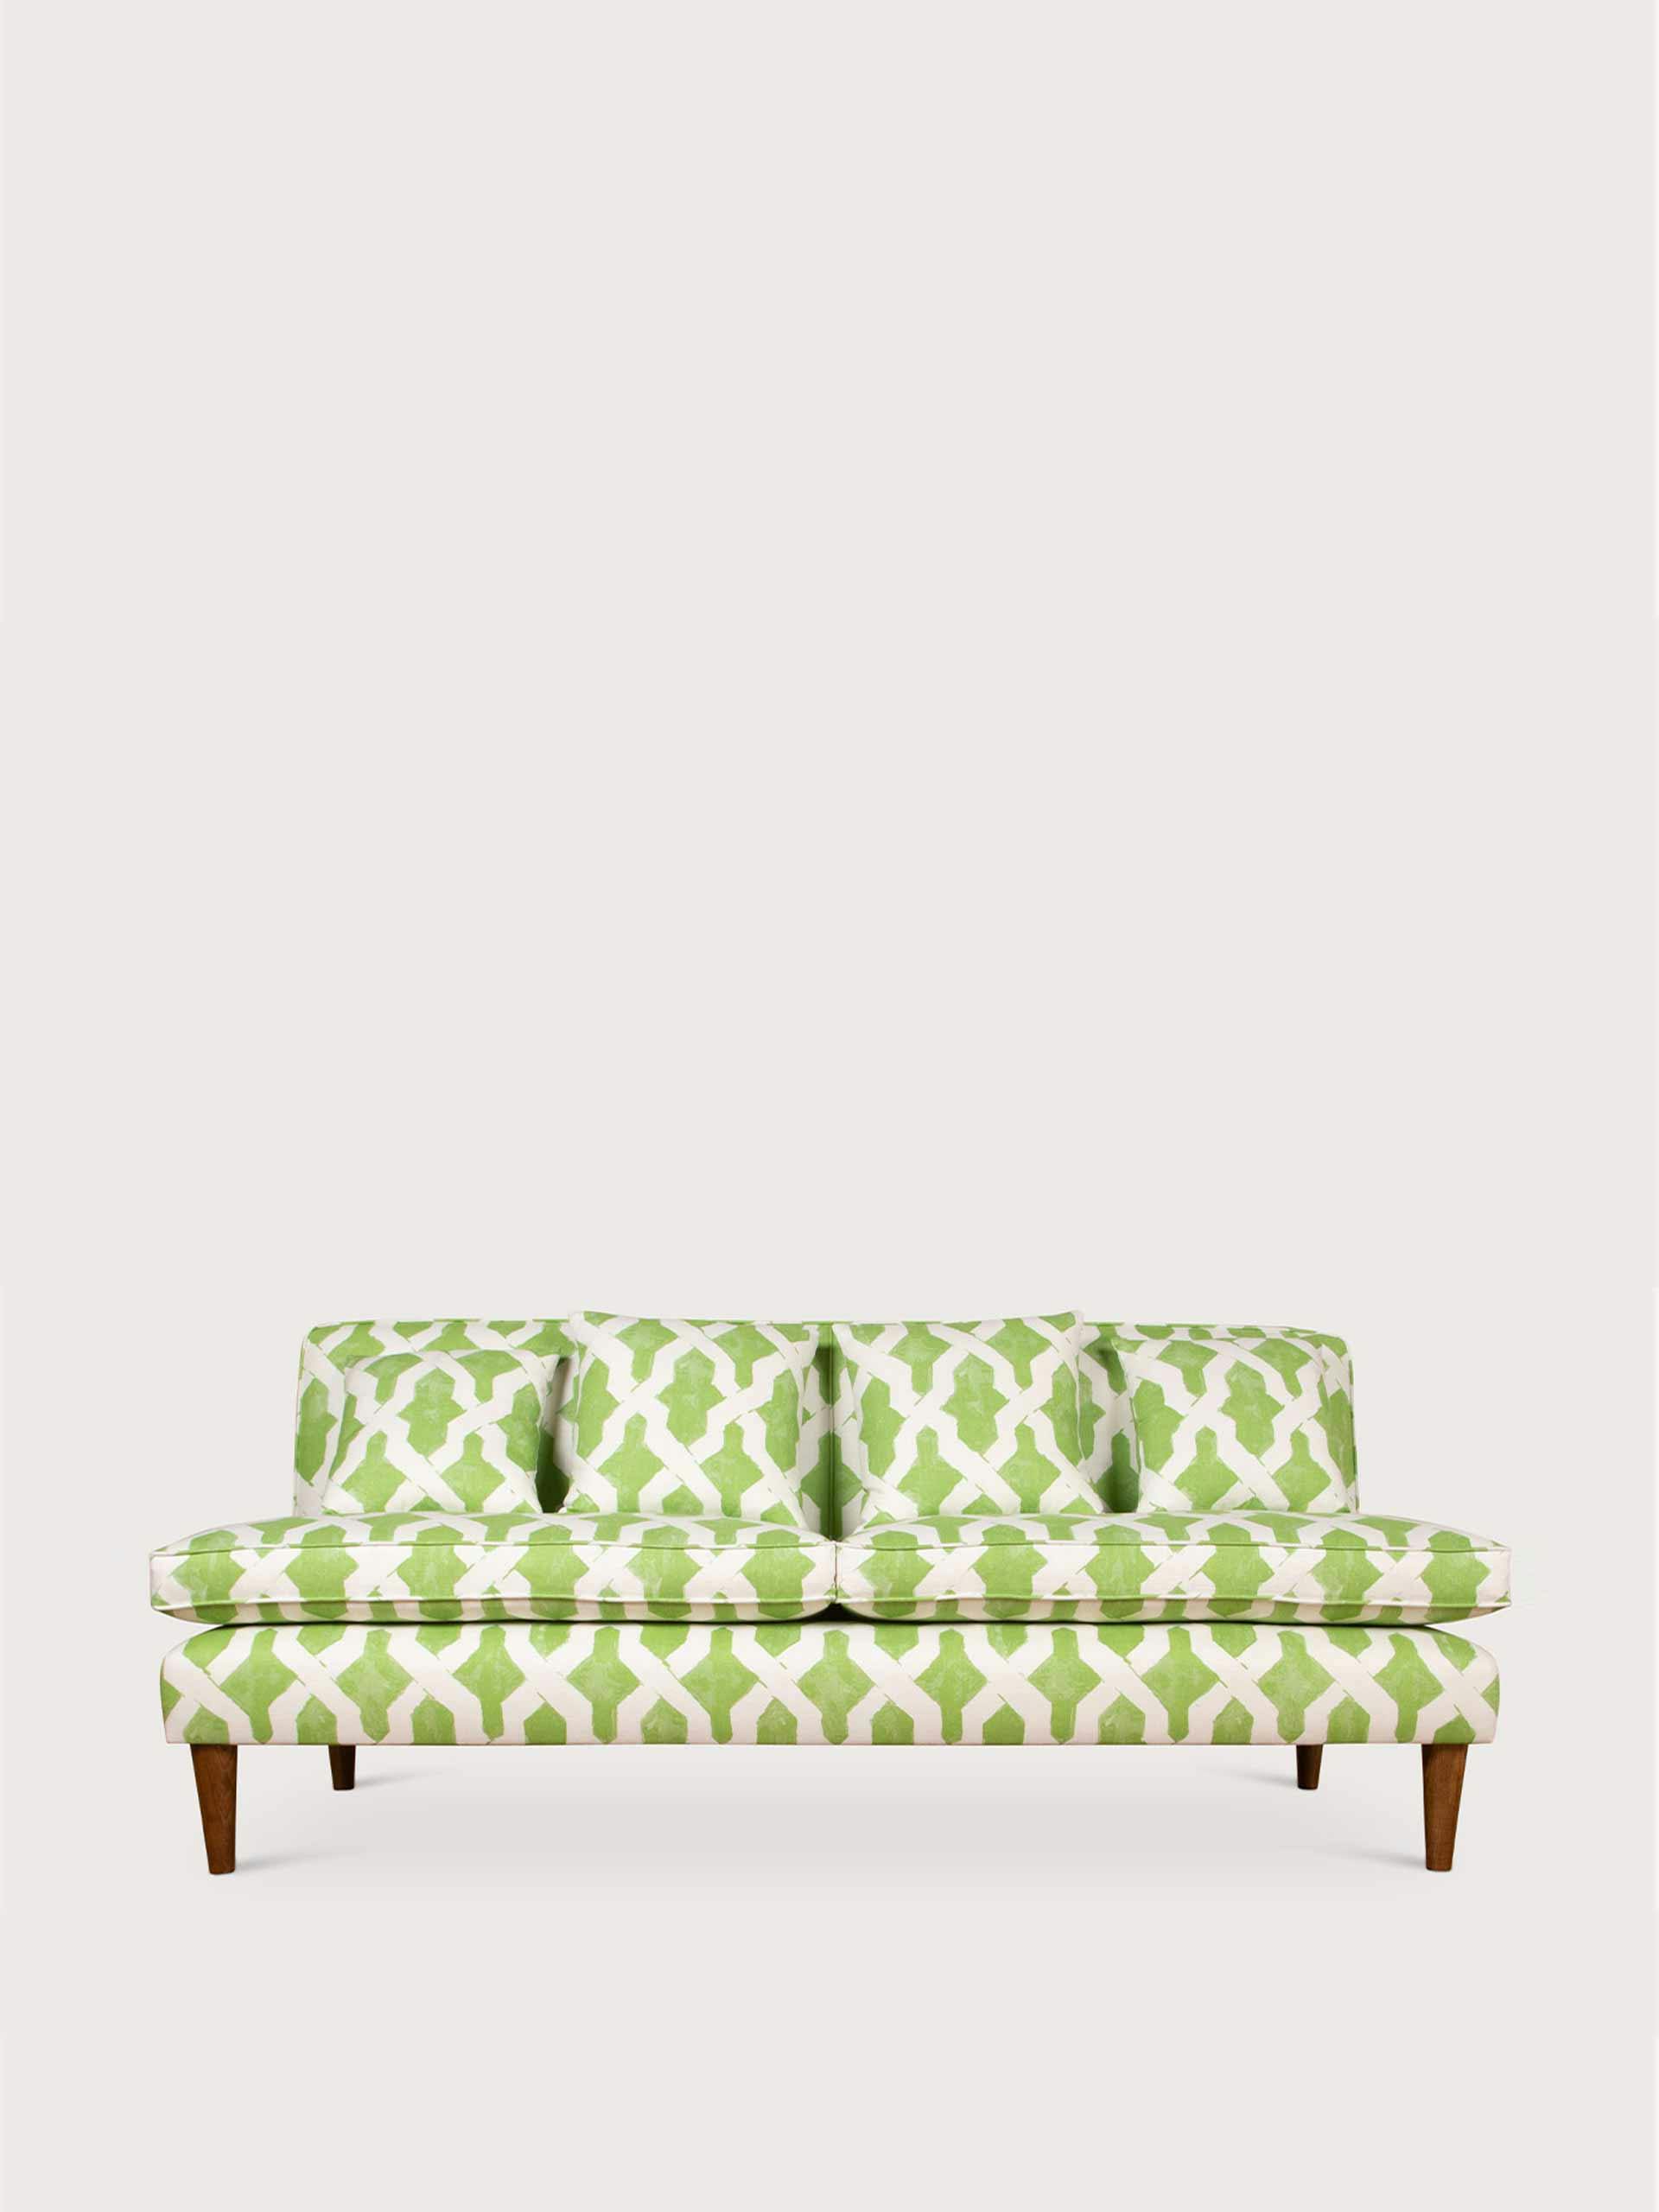 Patterned armless sofa